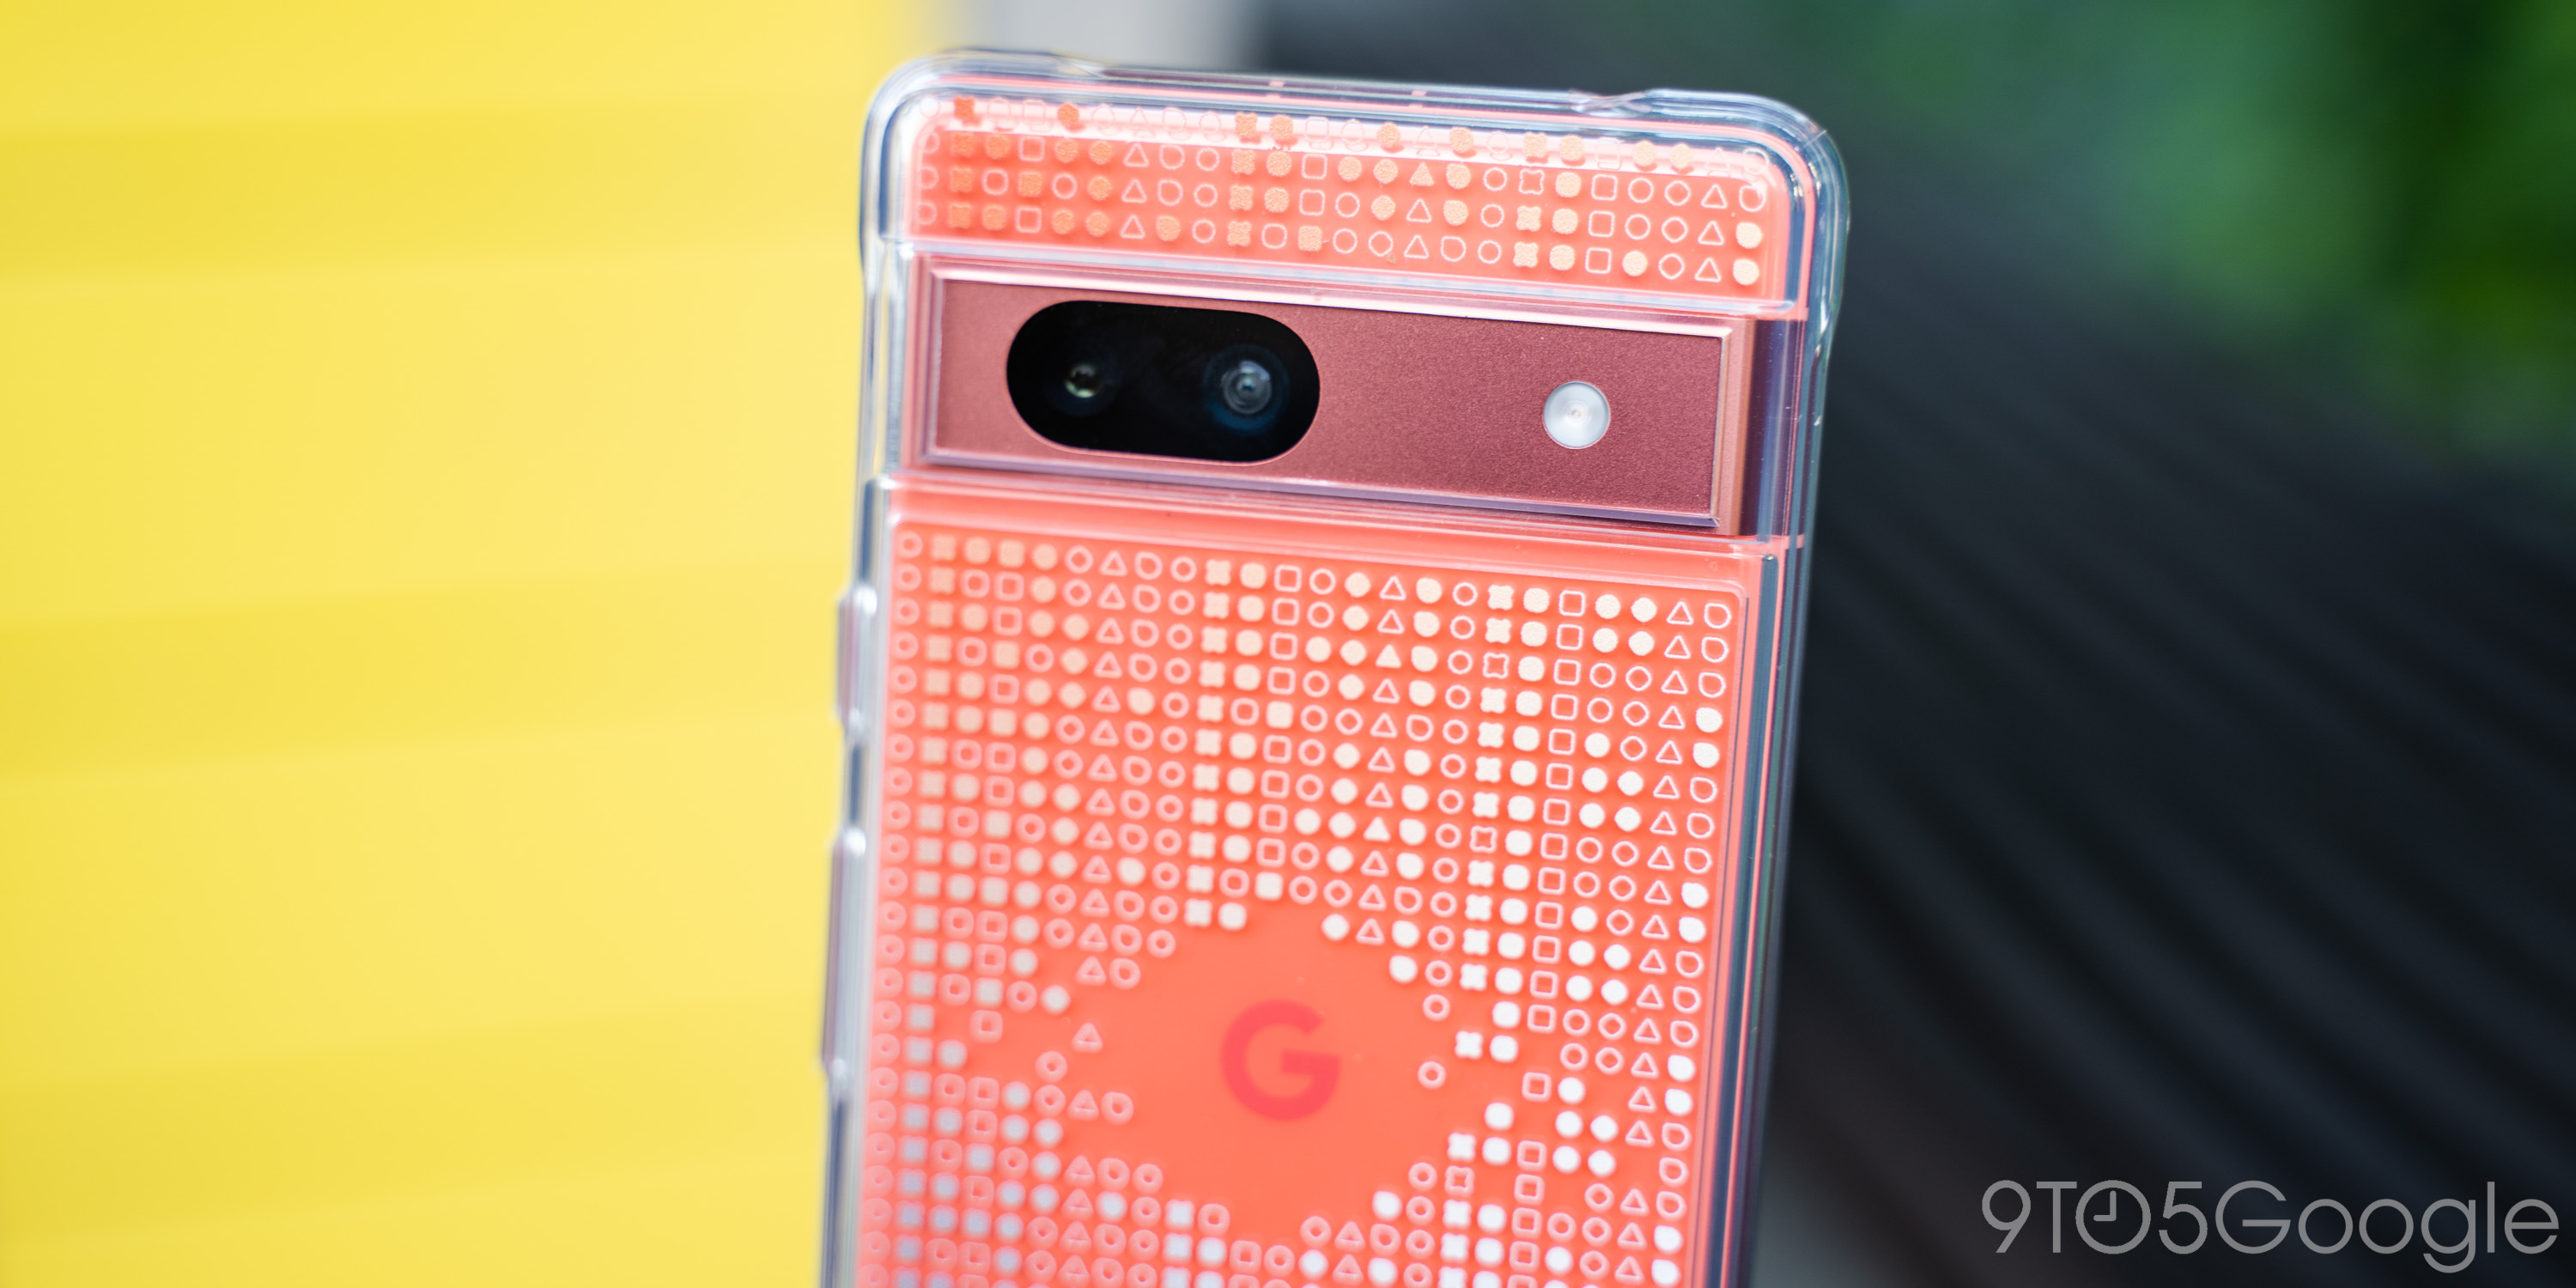 Pixel 7a, built to perform – Google Store